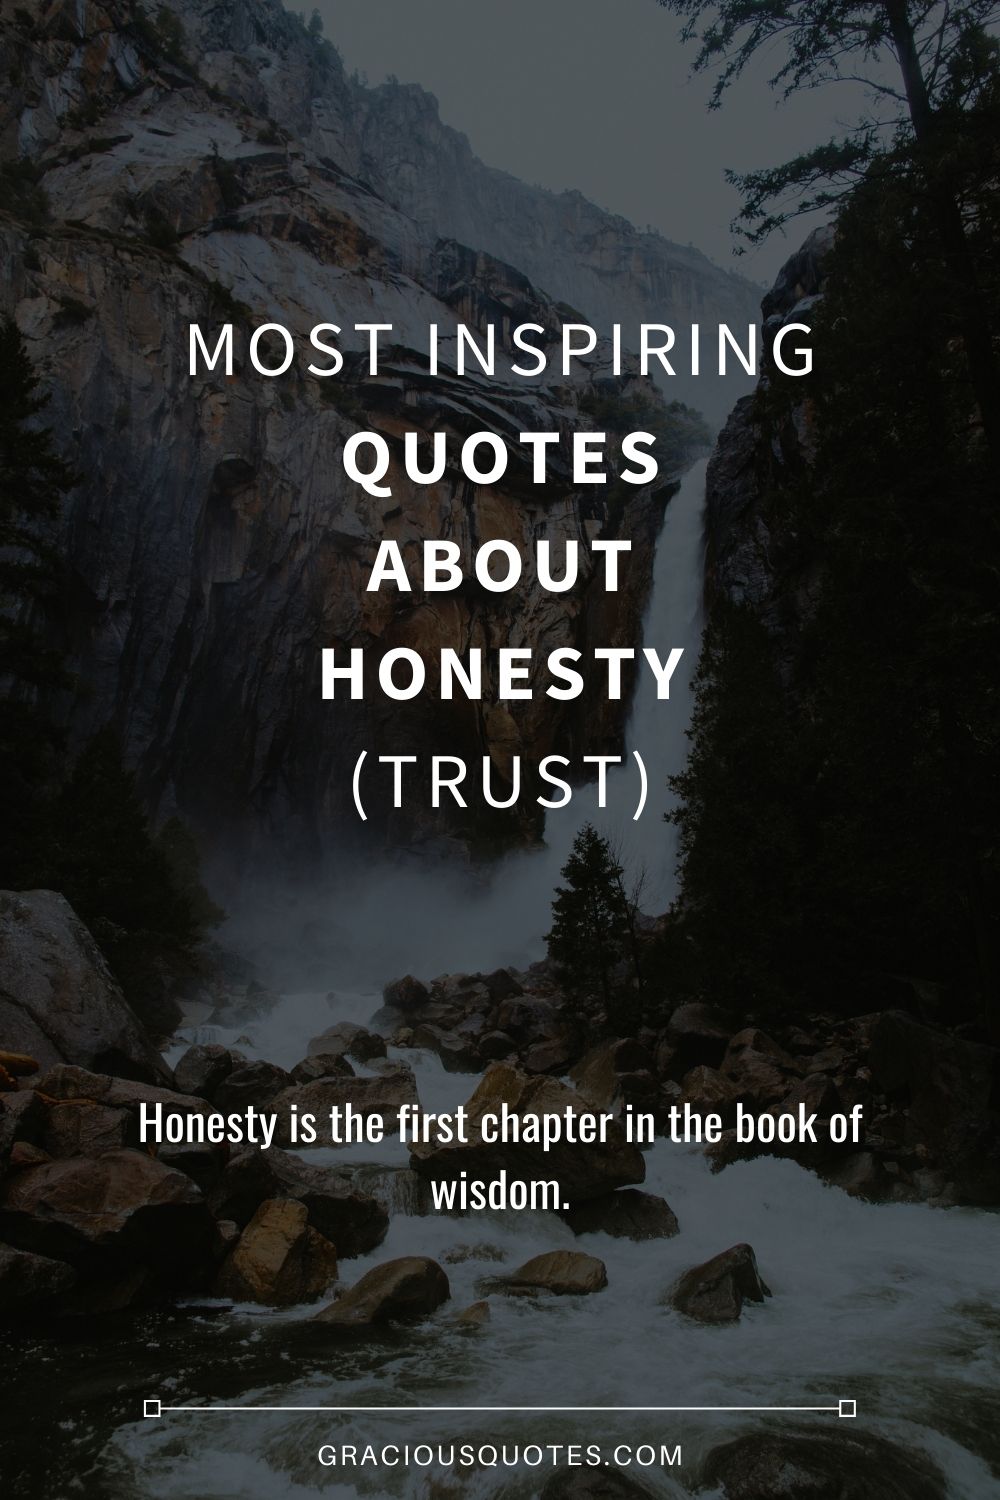 Most Inspiring Quotes About Honesty (TRUST) - Gracious Quotes